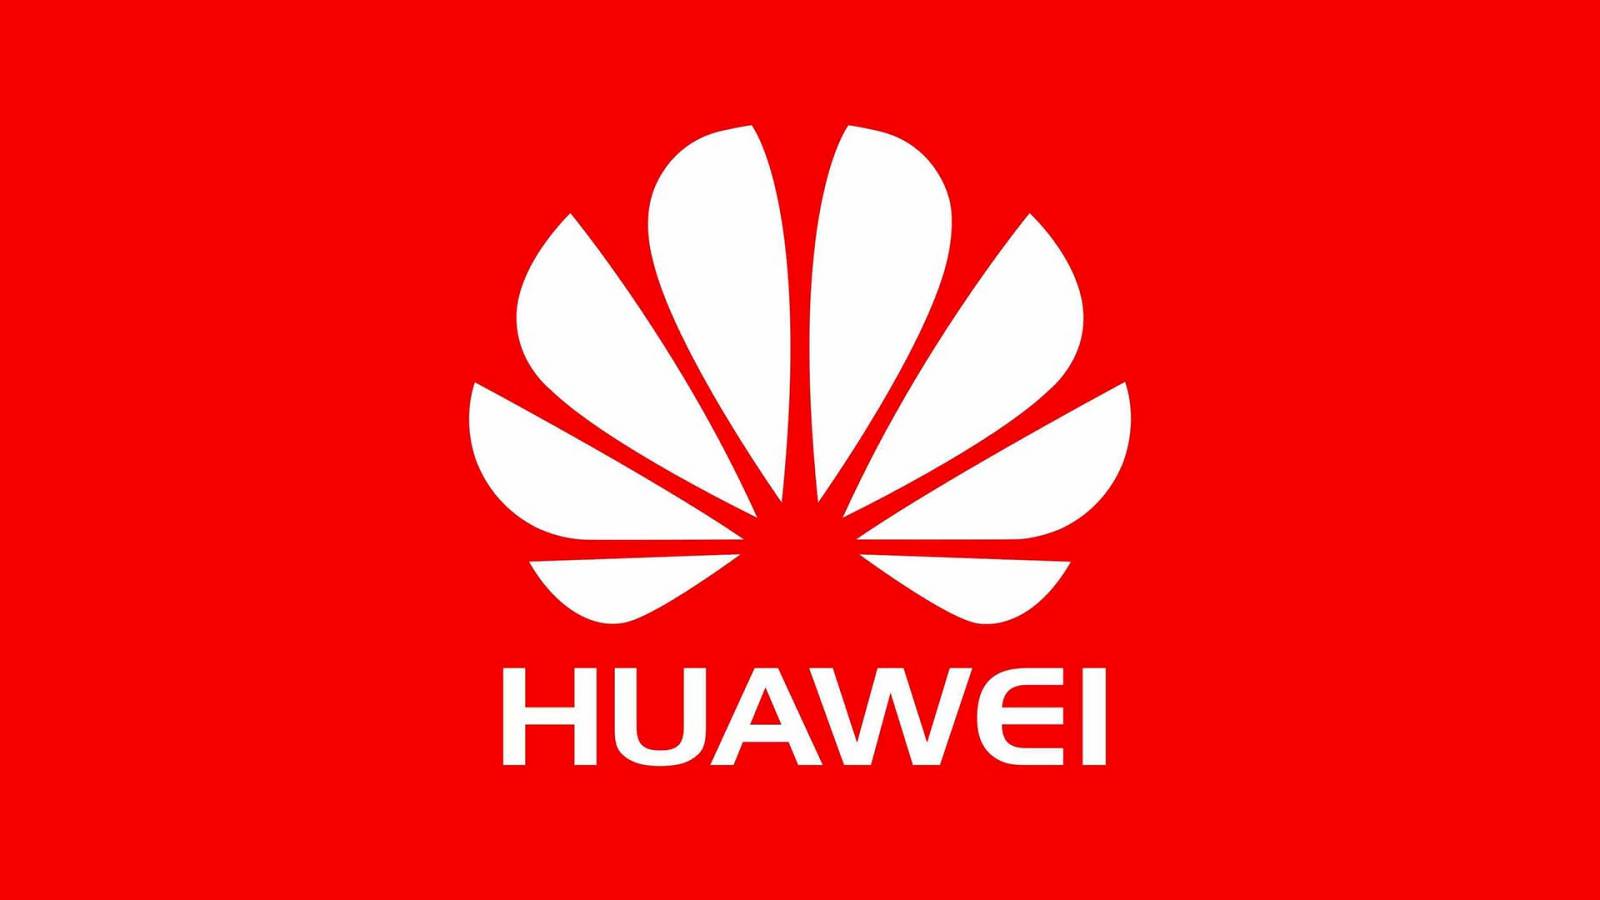 Huawei phones remain a BIG PROBLEM for customers